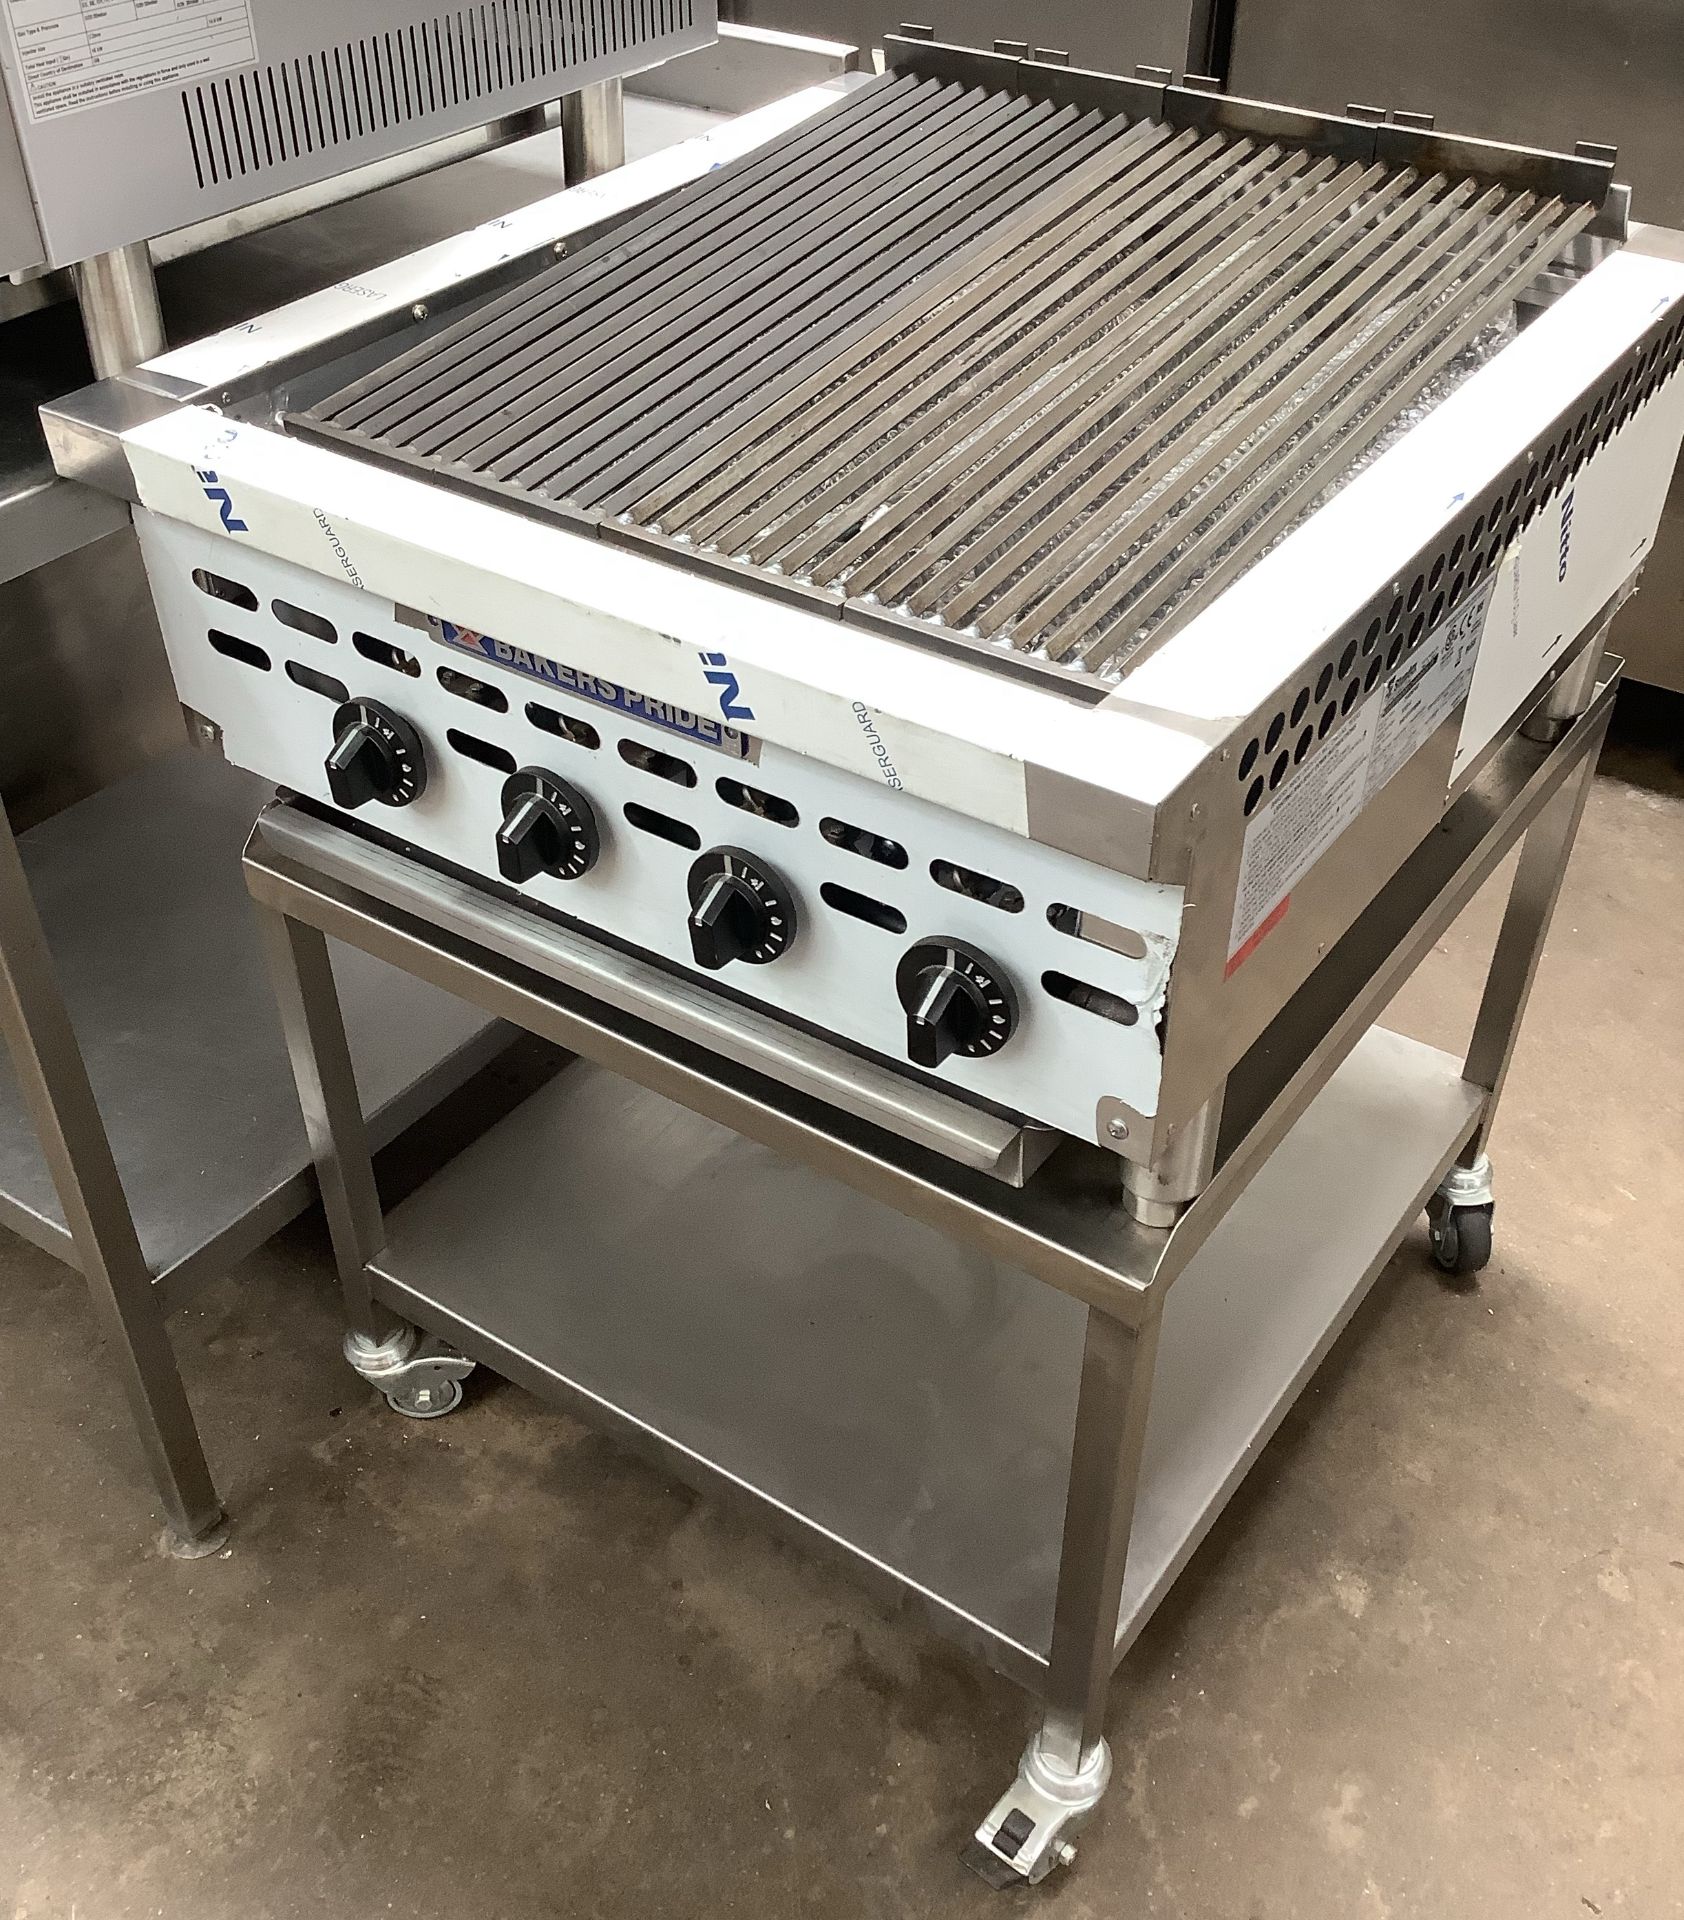 New Bakers Pride 4 Burner Gas Chargrill On Stand - Image 2 of 2